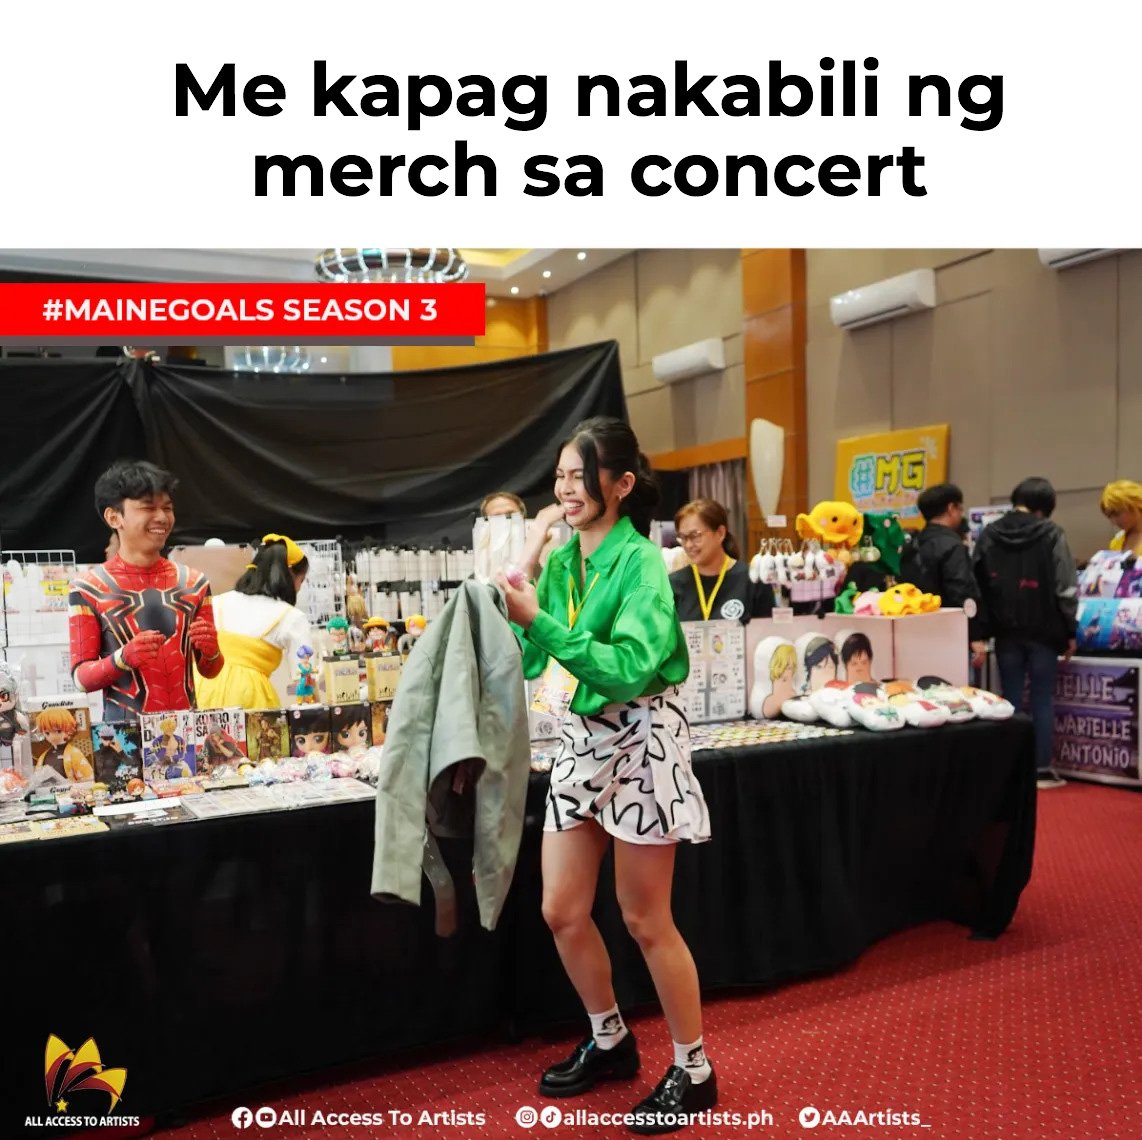 Fanboys and fangirls can relate!

@mainedcm in #MaineGoals

#MaineGoalsSeason3
Saturdays, 9:00 AM on TV5

#MaineMendoza #AllAccessToArtists #fAAAmily